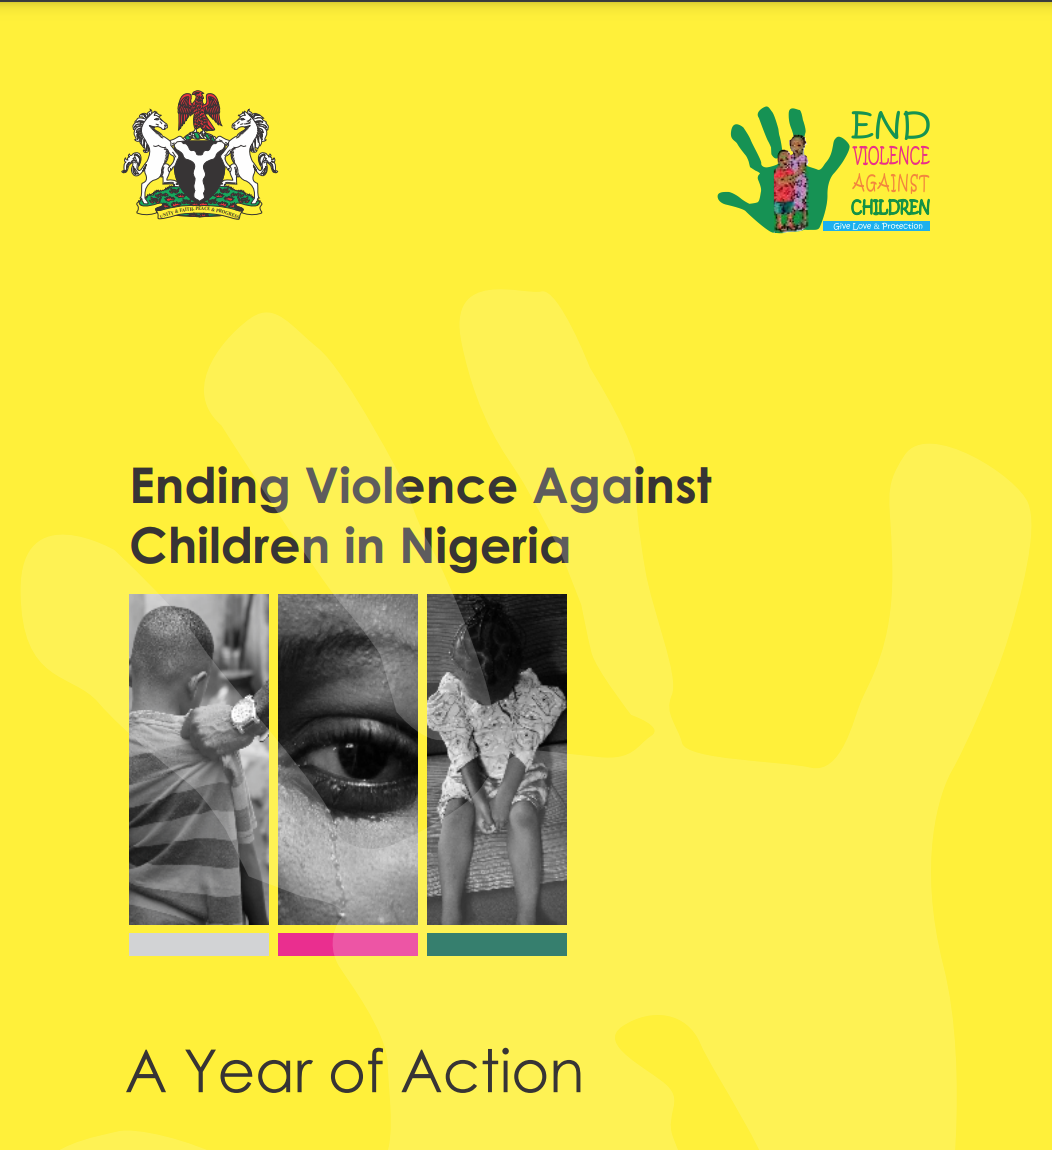 Ending Violence Against Children in Nigeria A Year of Action 2015-2016